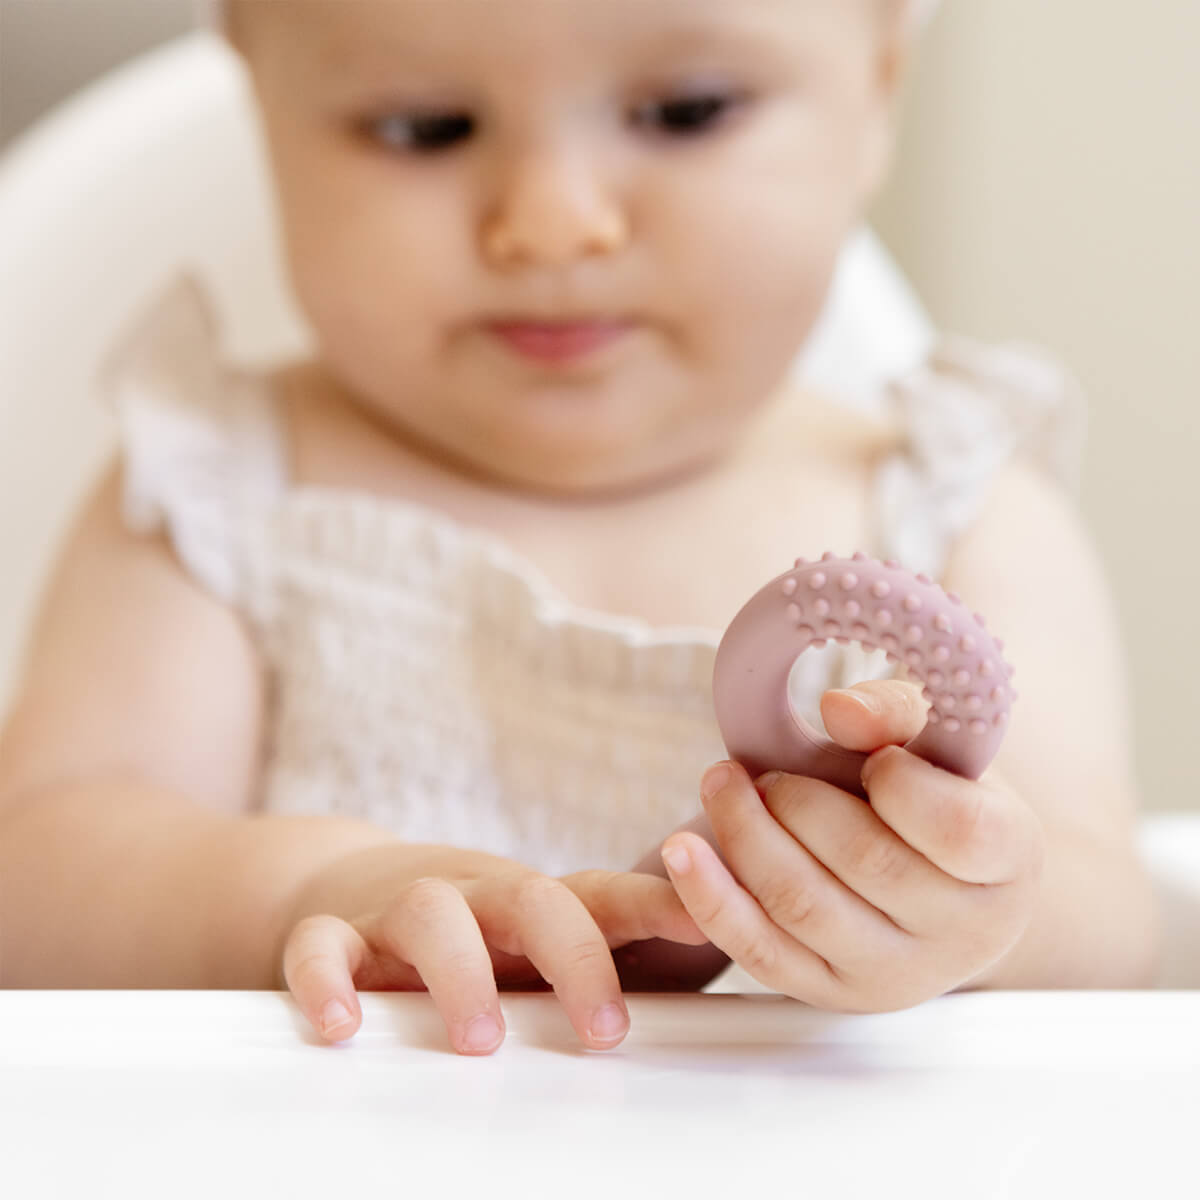 ezpz oral development tools in blush pink / silicone teethers for motor skill development